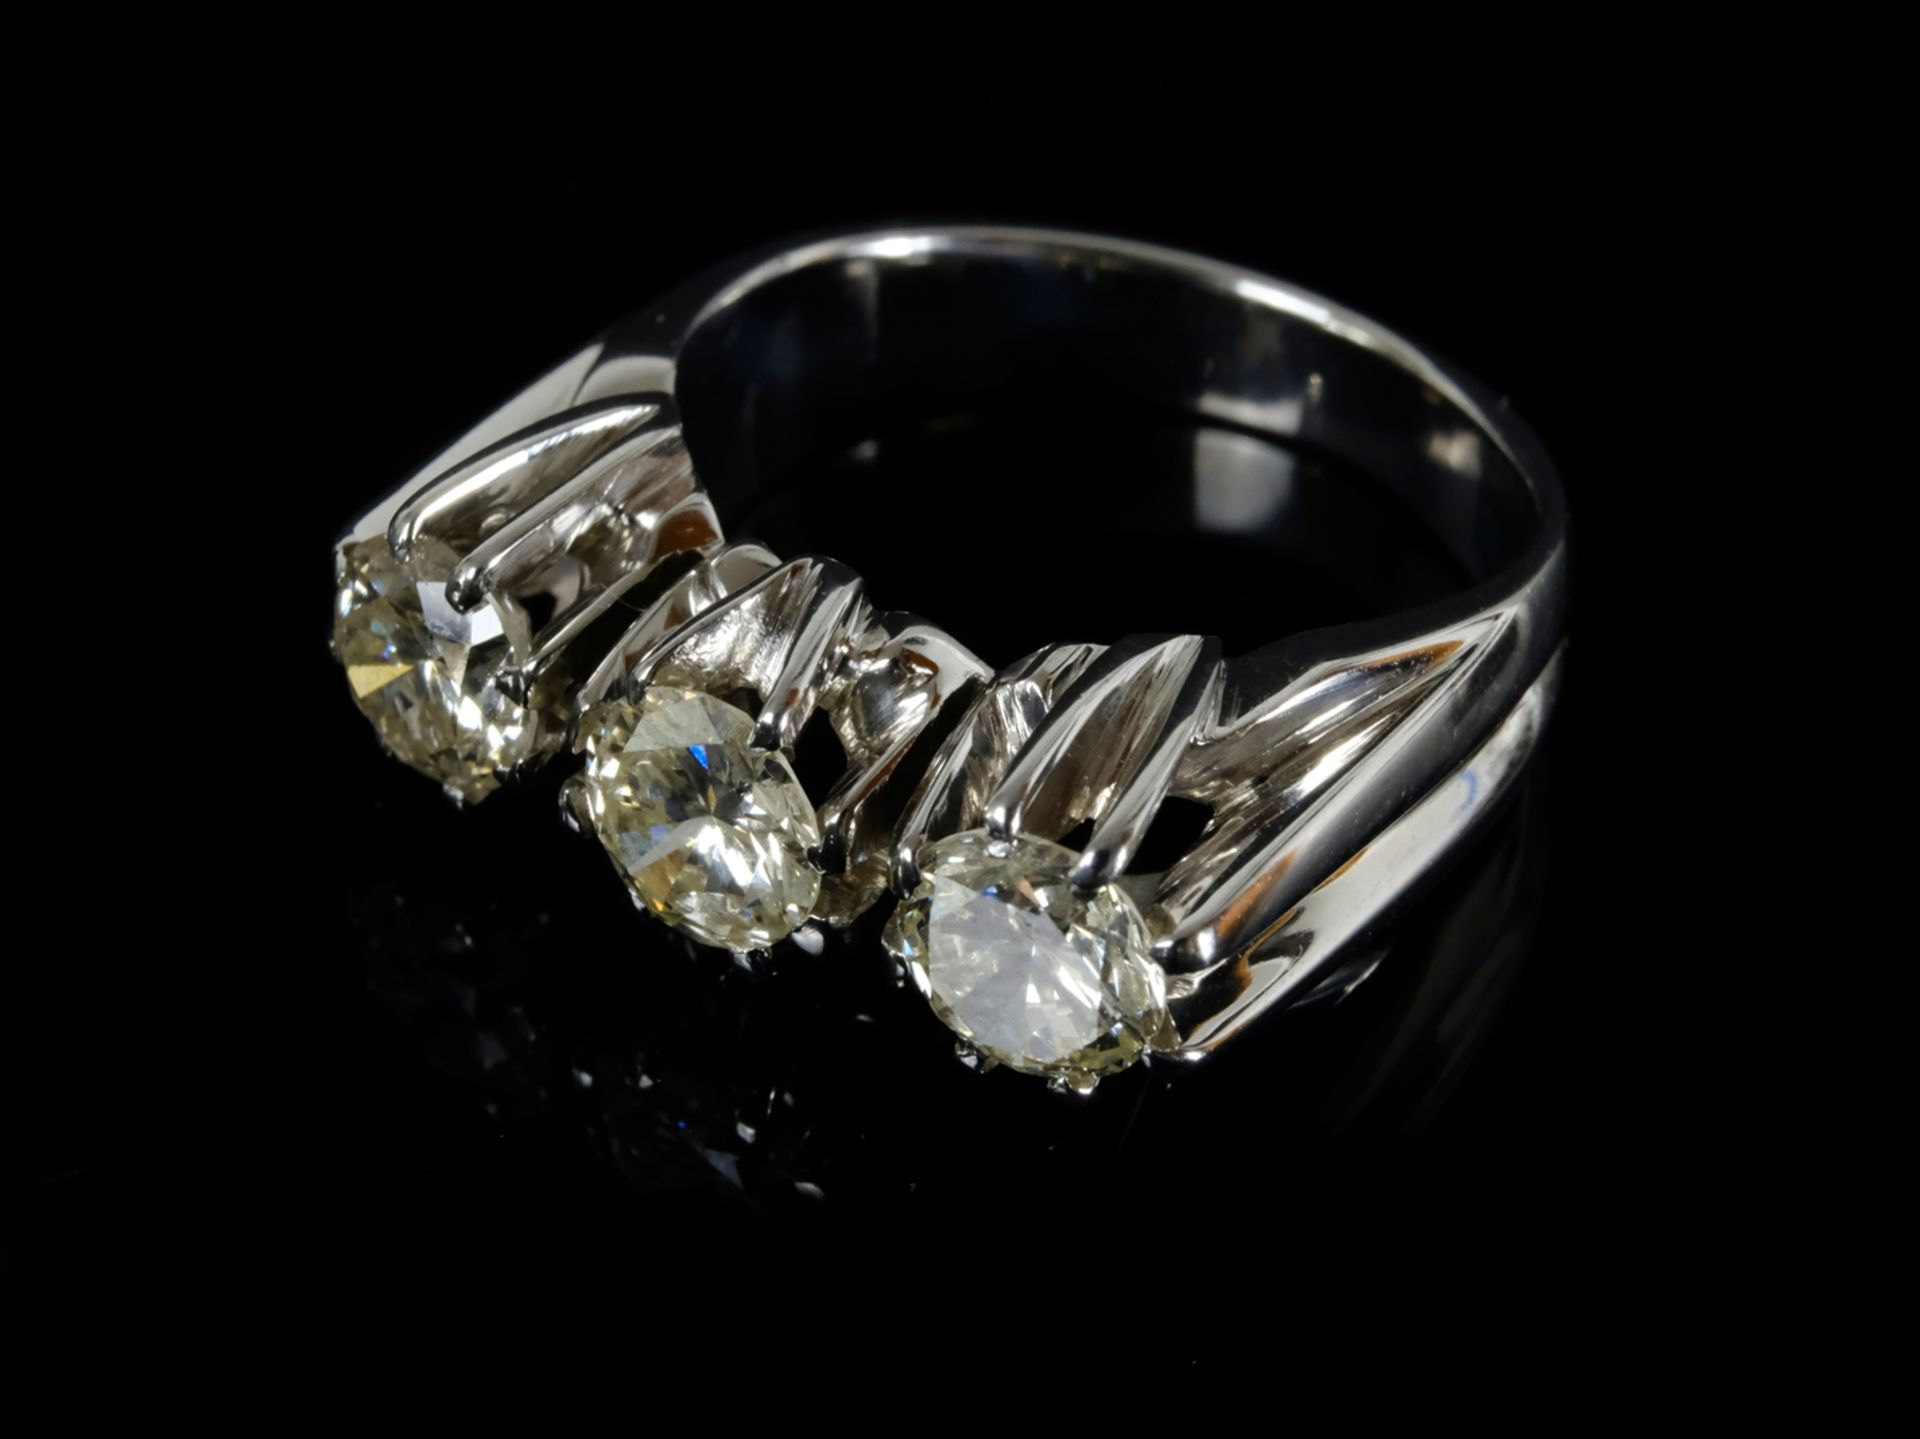 BRILLANT RING with three large brilliants, entire band around 2.25ct, approx. g-p1, 750 white gold,